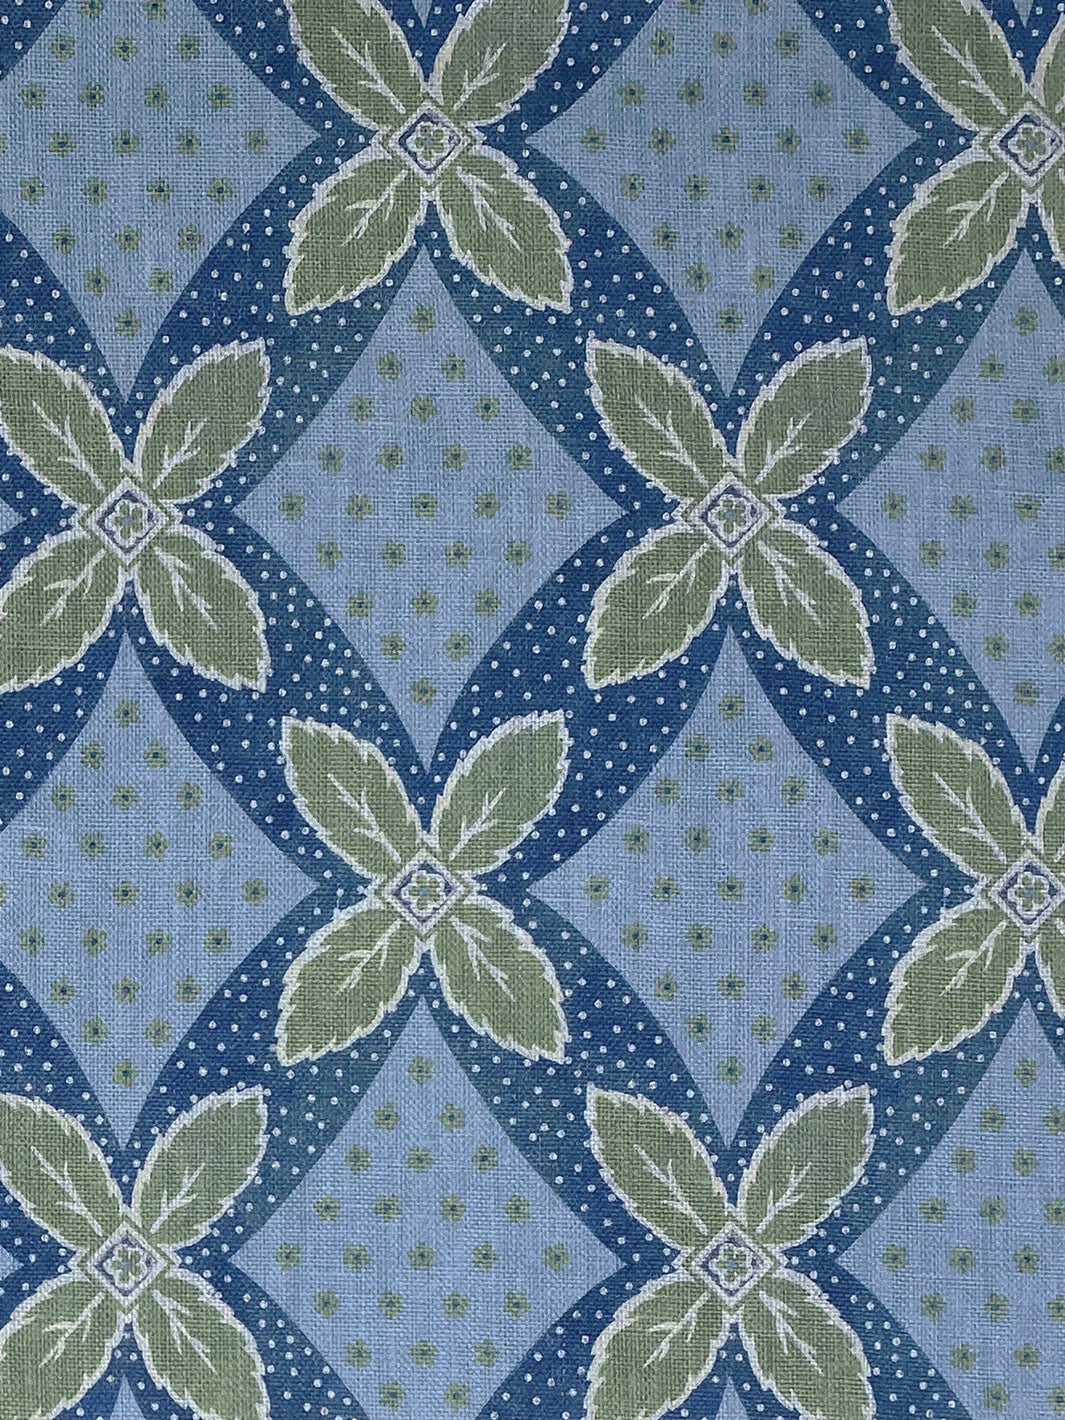 'Arthur' Linen Fabric by Nathan Turner - Green on Blue